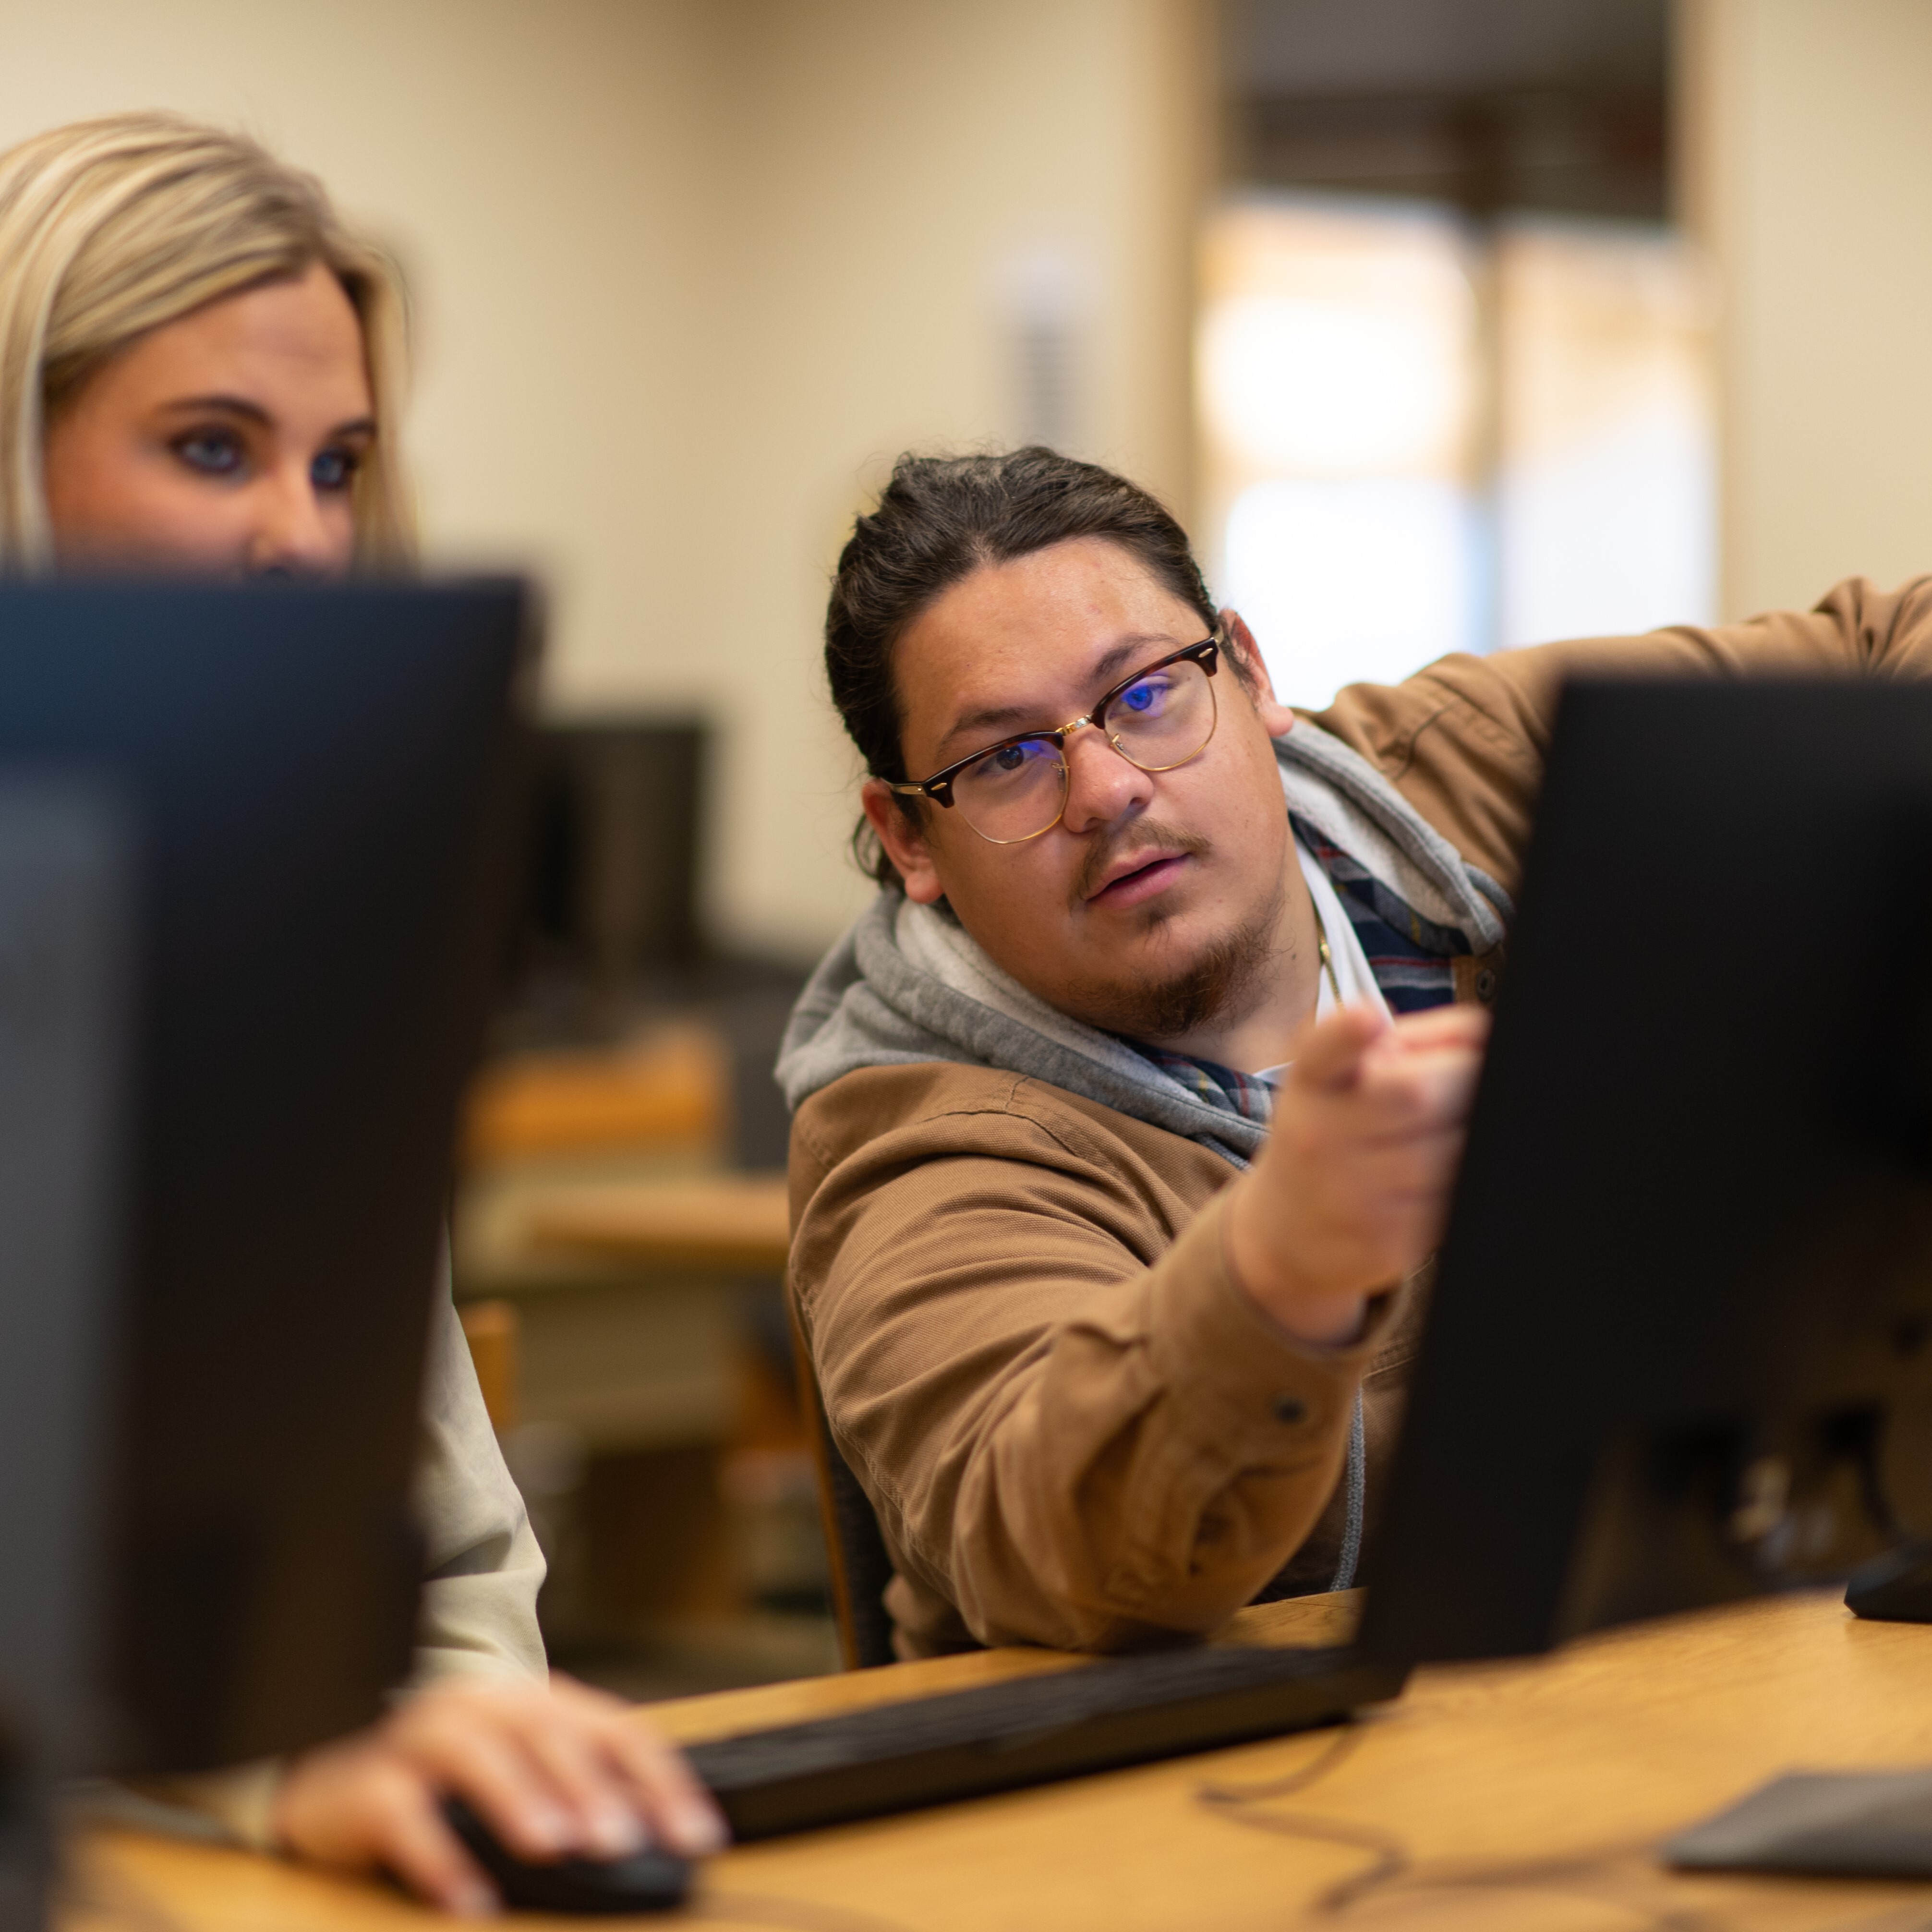 Male student assist the female on her computer